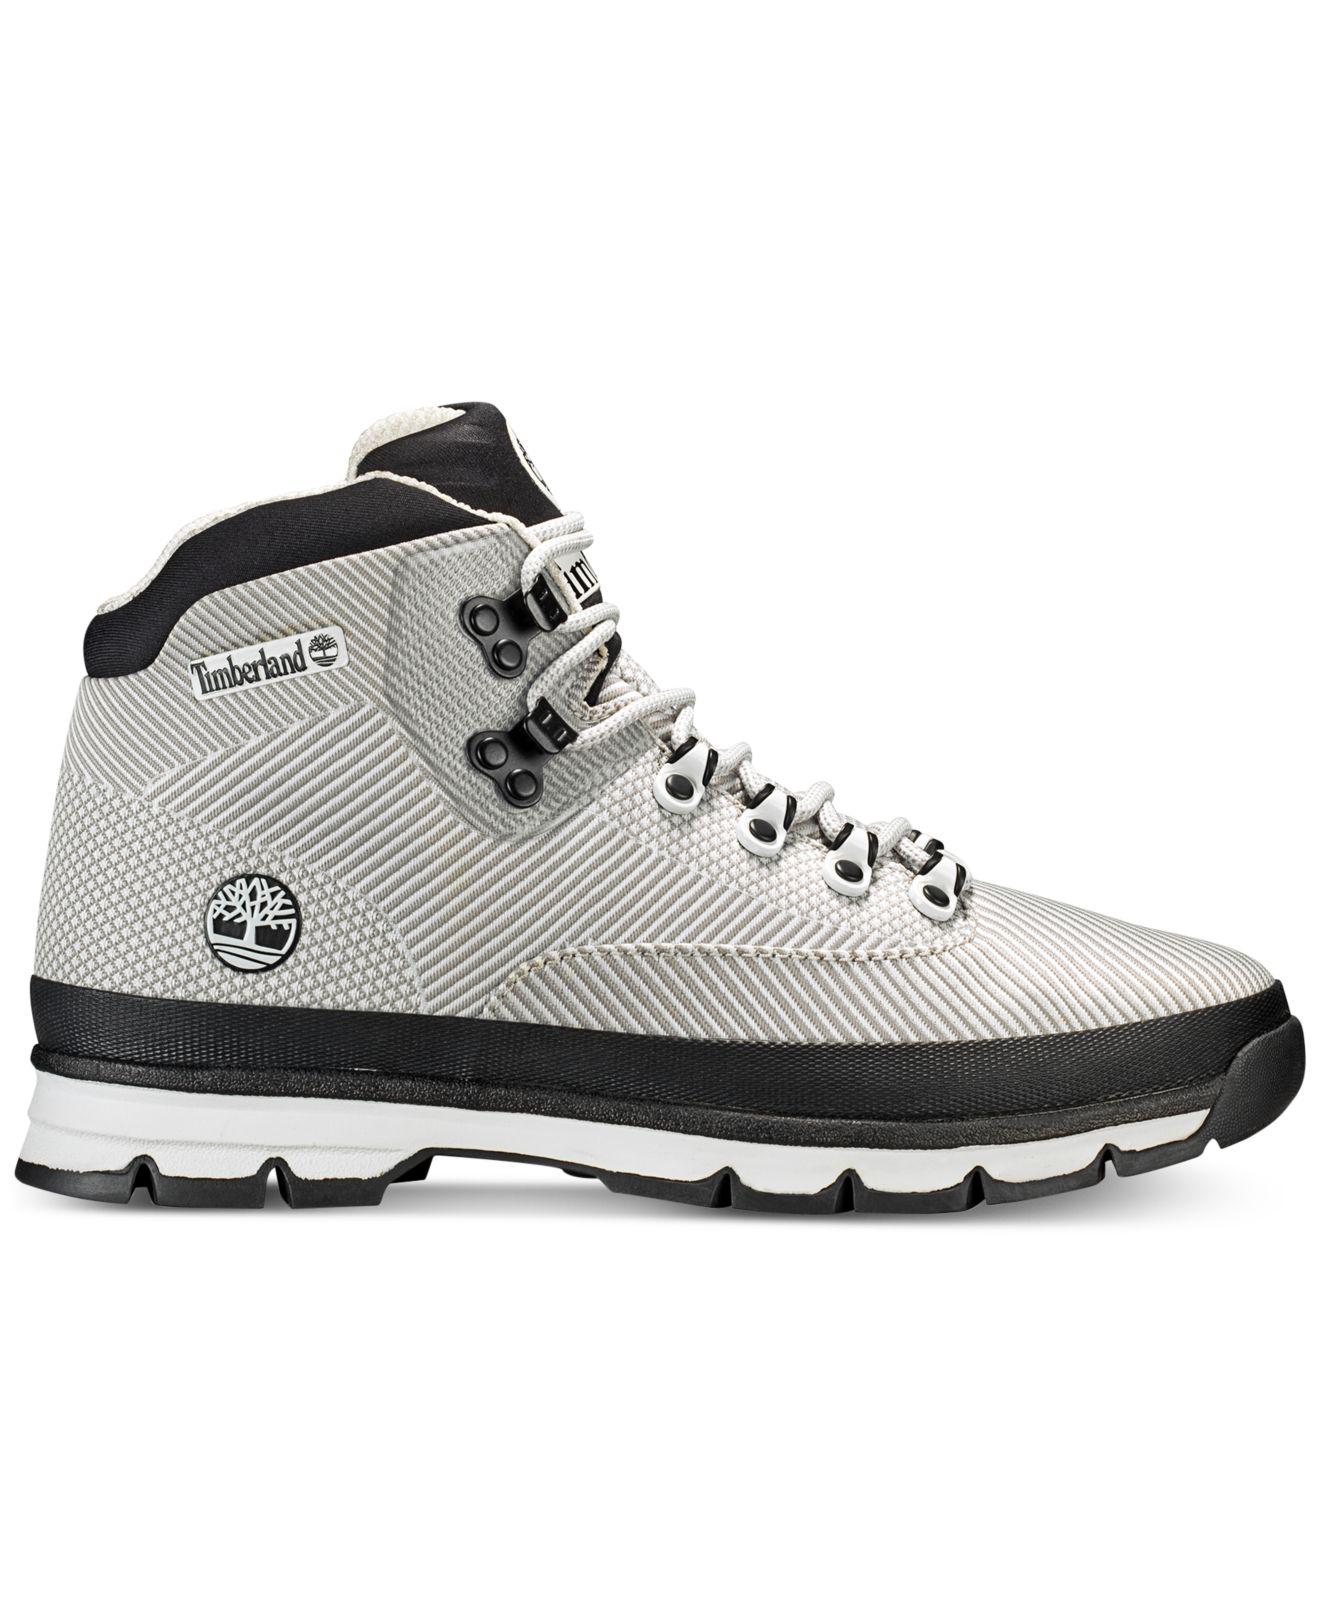 Timberland Synthetic Euro Hiker Jacquard Boots in White for Men - Lyst